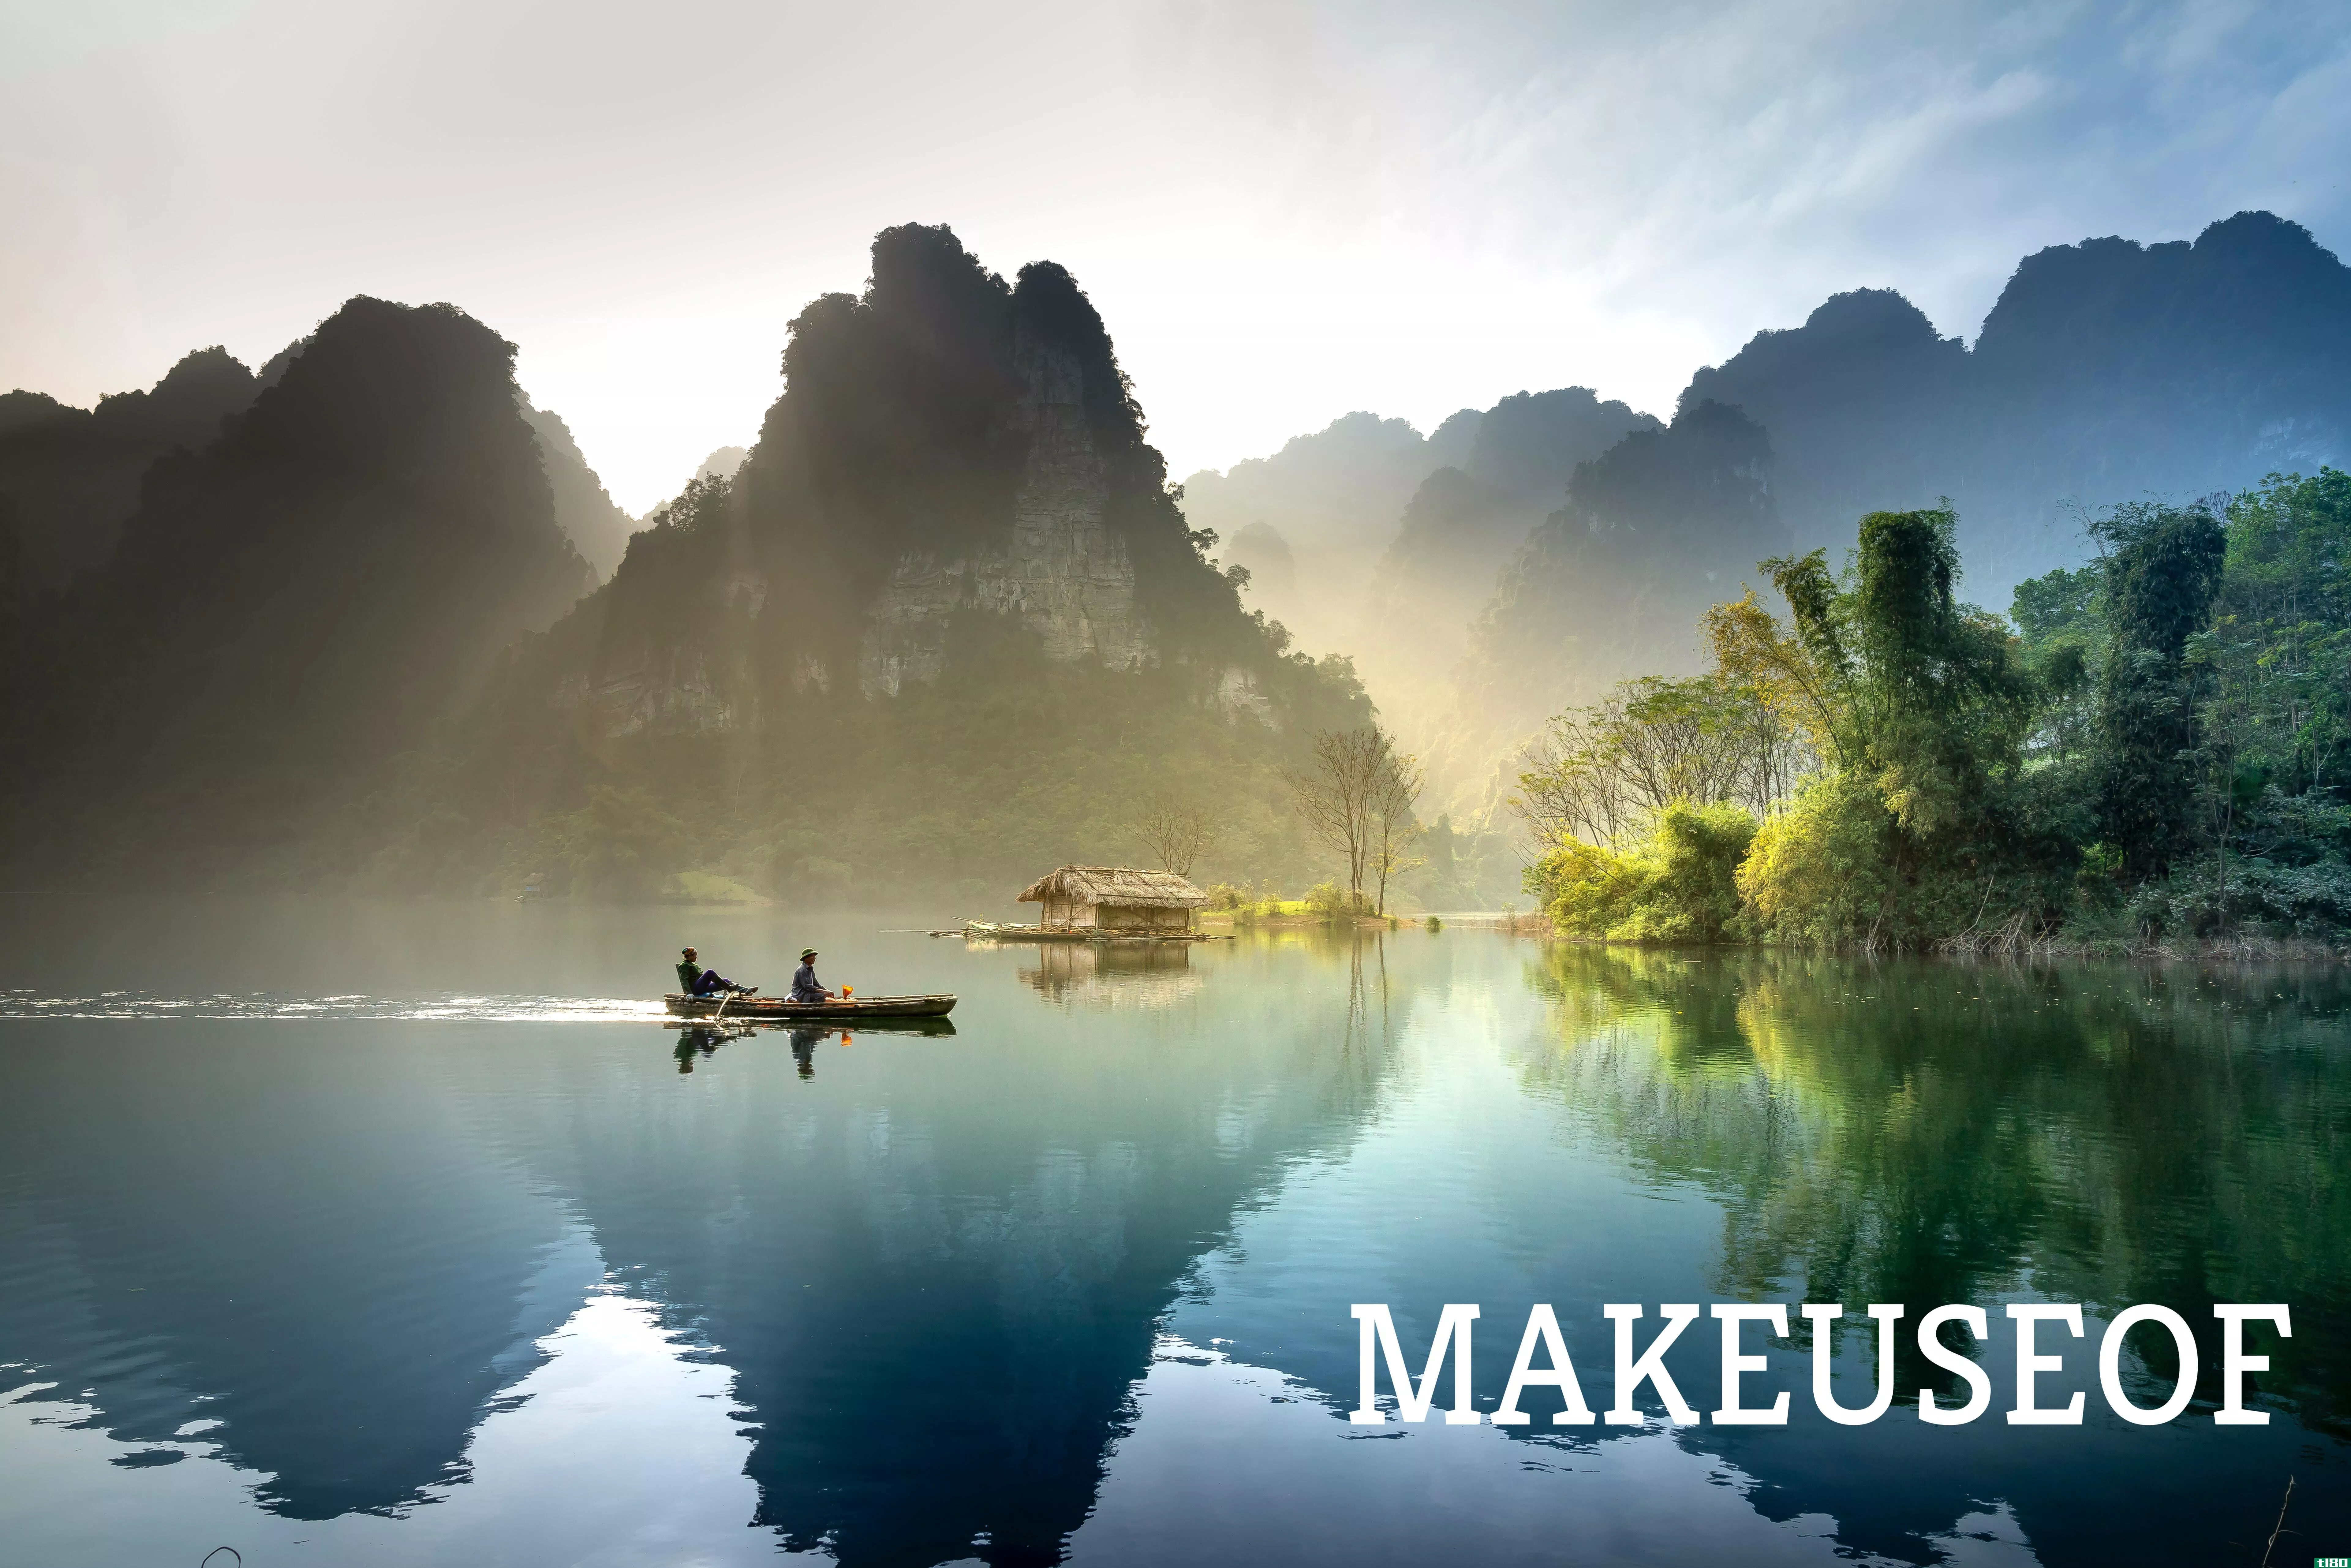 Landscape image with MakeUseOf watermark